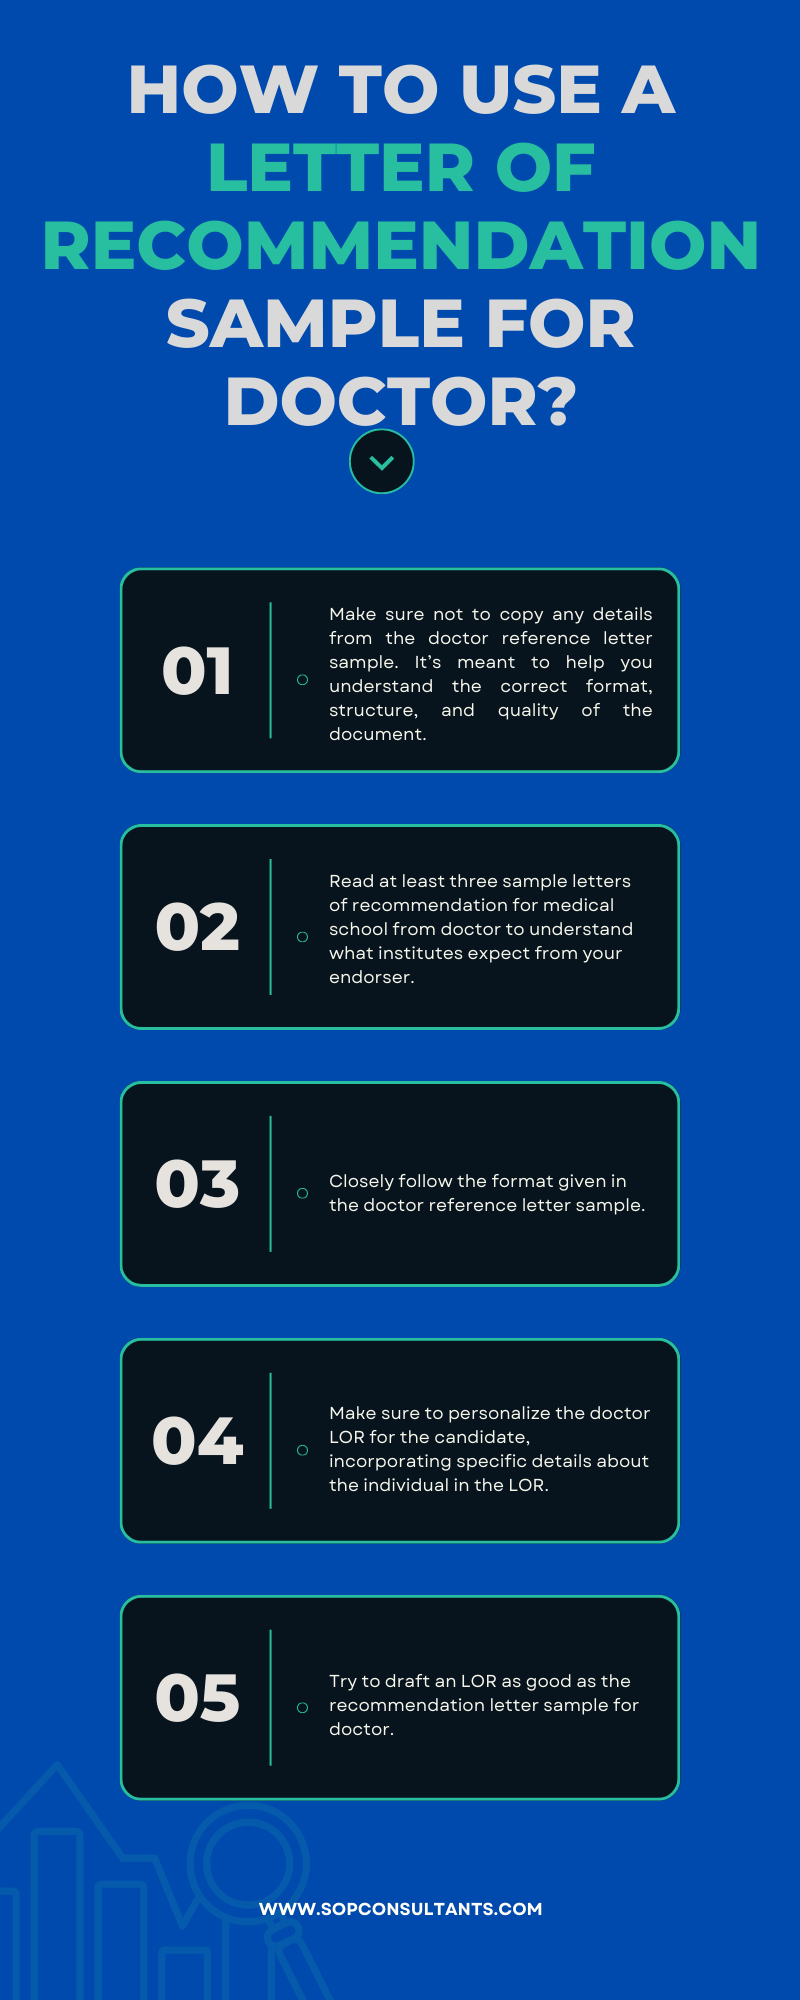 how to use a recommendation letter for doctor sample - infographic